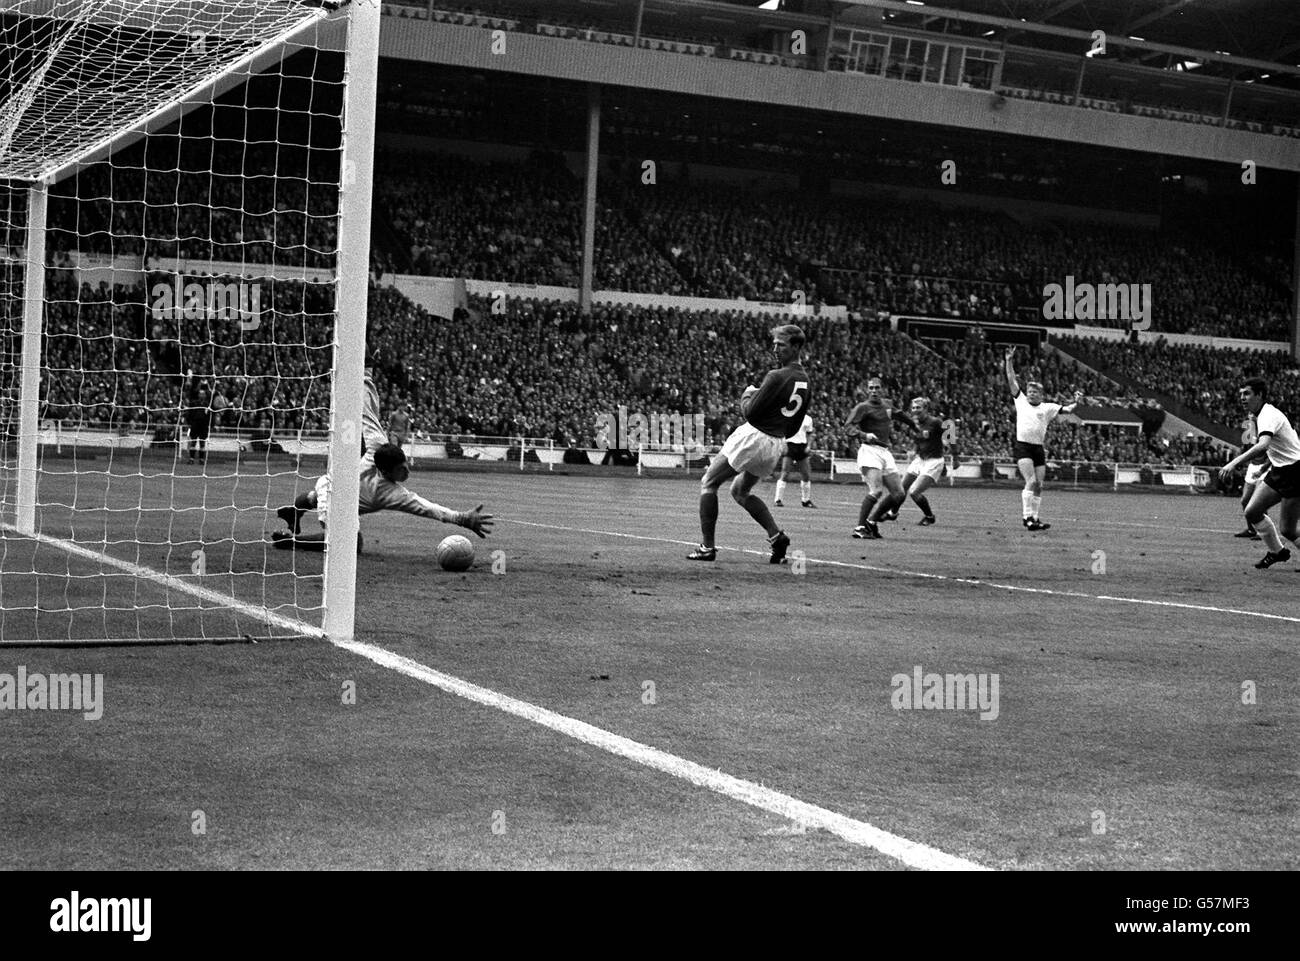 WORLD CUP 1966: The ball eludes the clutching hands of England goalkeeper Gordon Banks and goes into the net to give West Germany a 1-0 lead after 13 minutes in the World Cup Final at Wembley Stadium. The scorer was Helmut Haller. * England players in the picture are (l-r) Ray Wilson, Jackie Charlton and Bobby Moore. 7/3/01: Legendary goalkeeper Banks is to auction off his 1966 World Cup winning medal. The England star played in the side that beat the former West Germany 4-2 at Wembley to win football's greatest prize. Experts believe that the medal will fetch between 70,000 and 90,000 at the Stock Photo